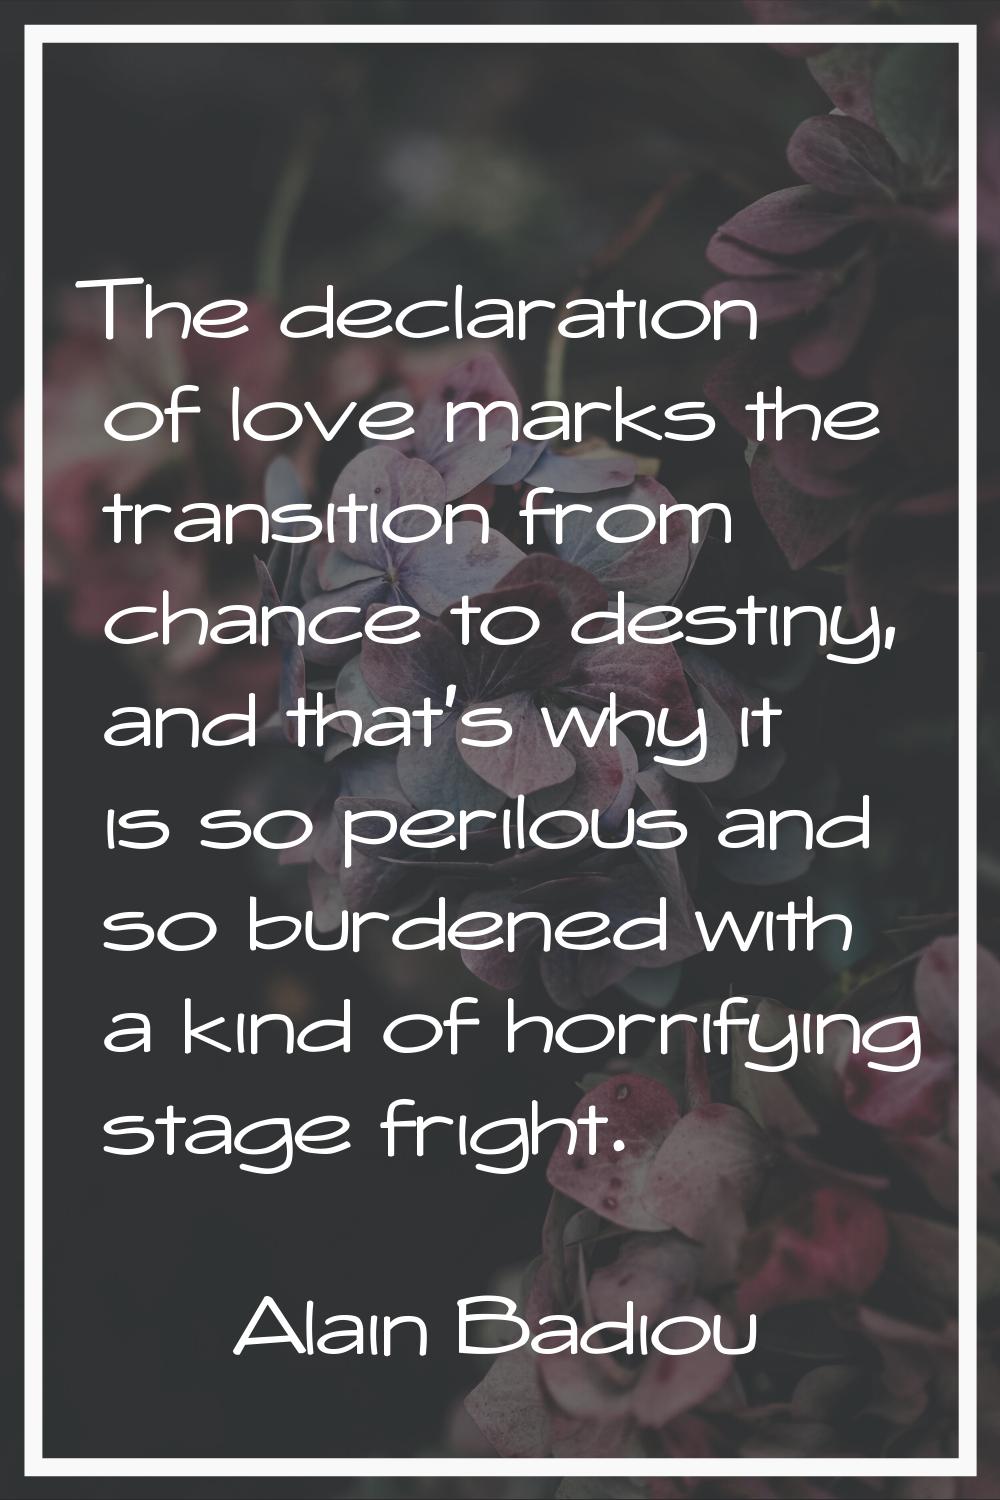 The declaration of love marks the transition from chance to destiny, and that's why it is so perilo